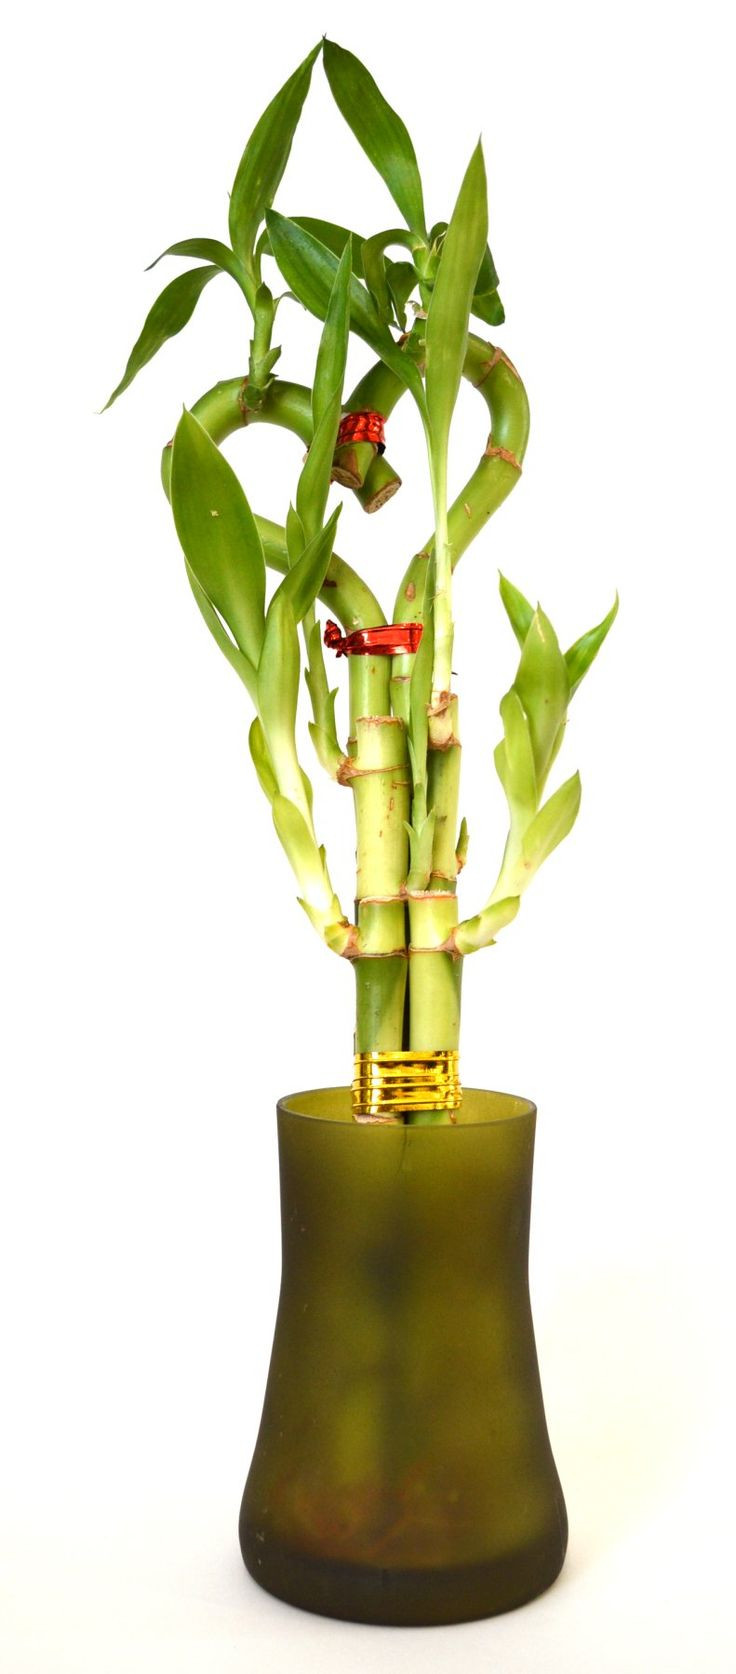 13 Lovable Vase for Lucky Bamboo Plant 2024 free download vase for lucky bamboo plant of 414 best products images on pinterest bamboo lucky bamboo and for 9greenbox lucky bamboo heart style with tall glass vase